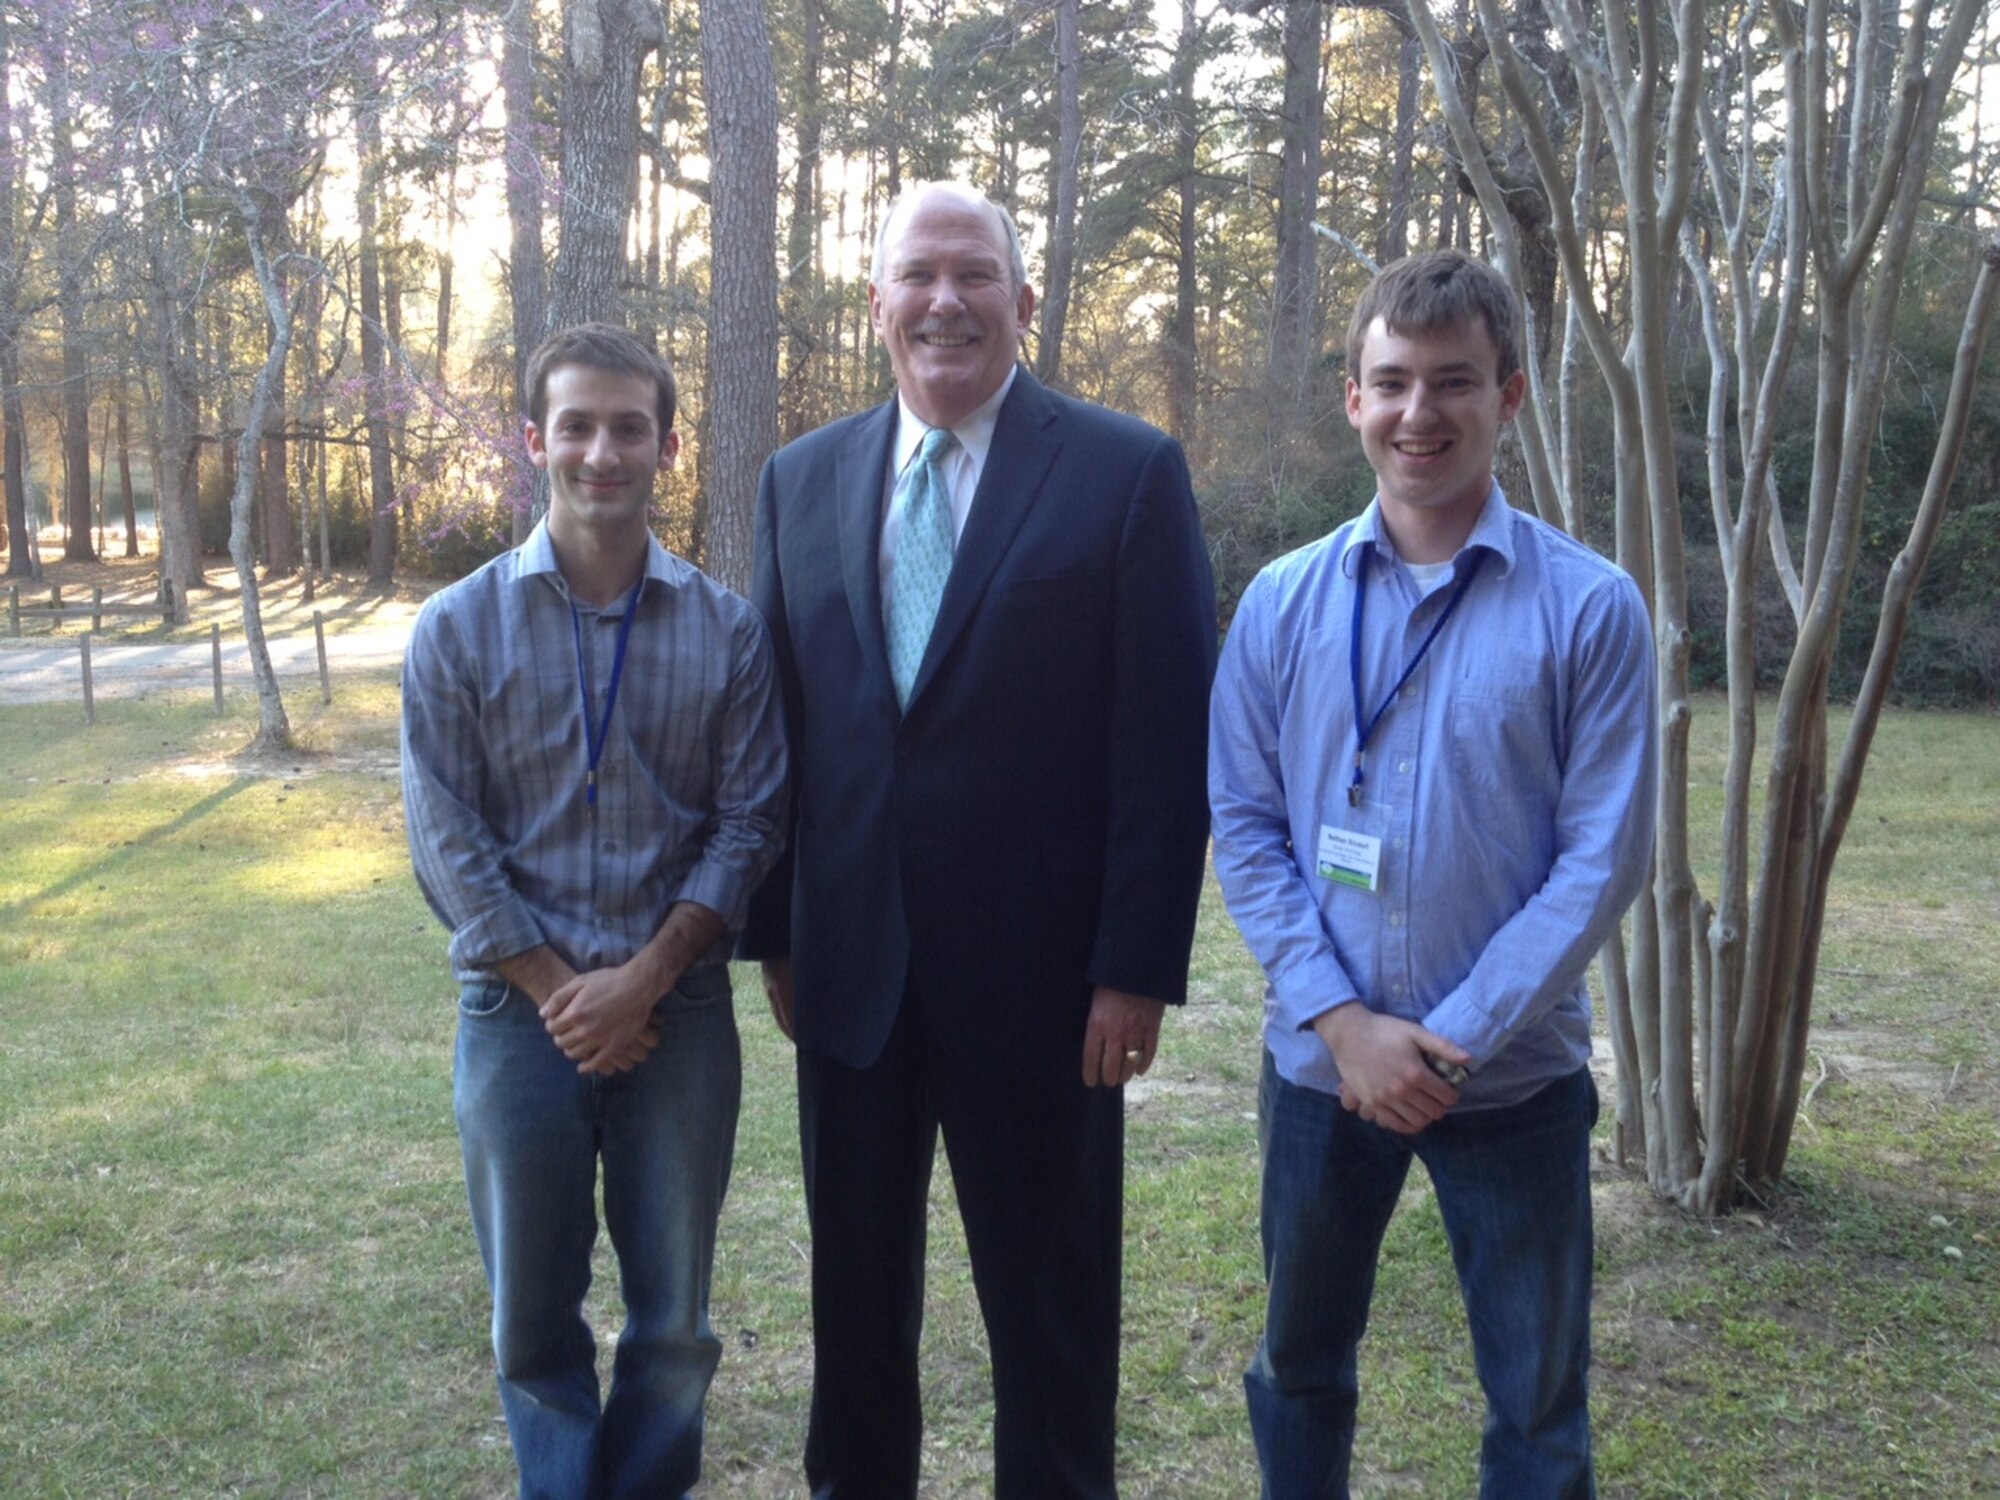 AEDC Engineers Billy Stack, left, and Nathan Sindorf, right, poses for a picture with Jacobs’ President Craig Martin while attending the global Jacobs Future Weekend event in Texas last month. (Photo provided)